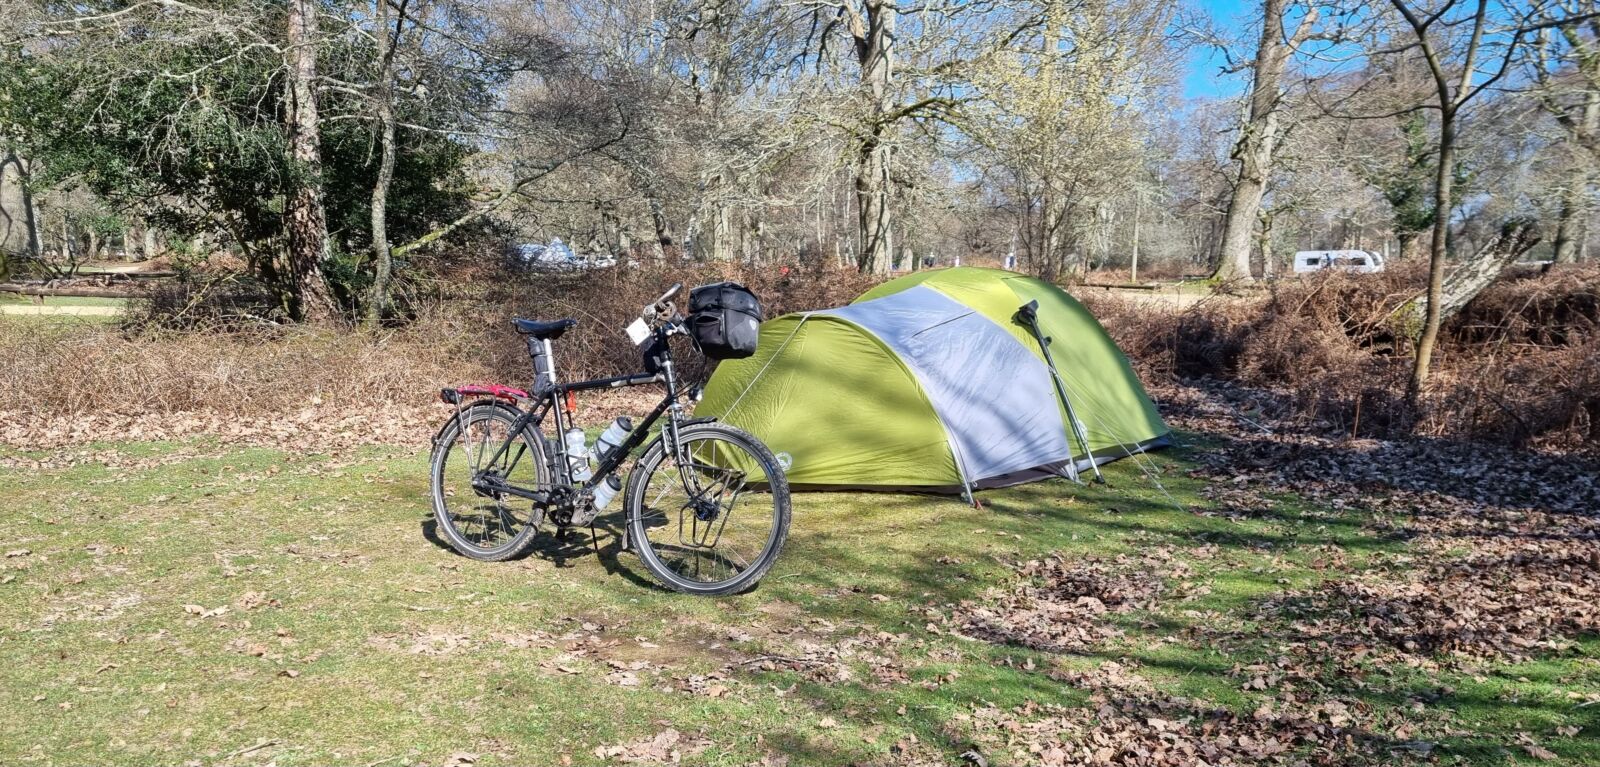 Tent bicycle trees